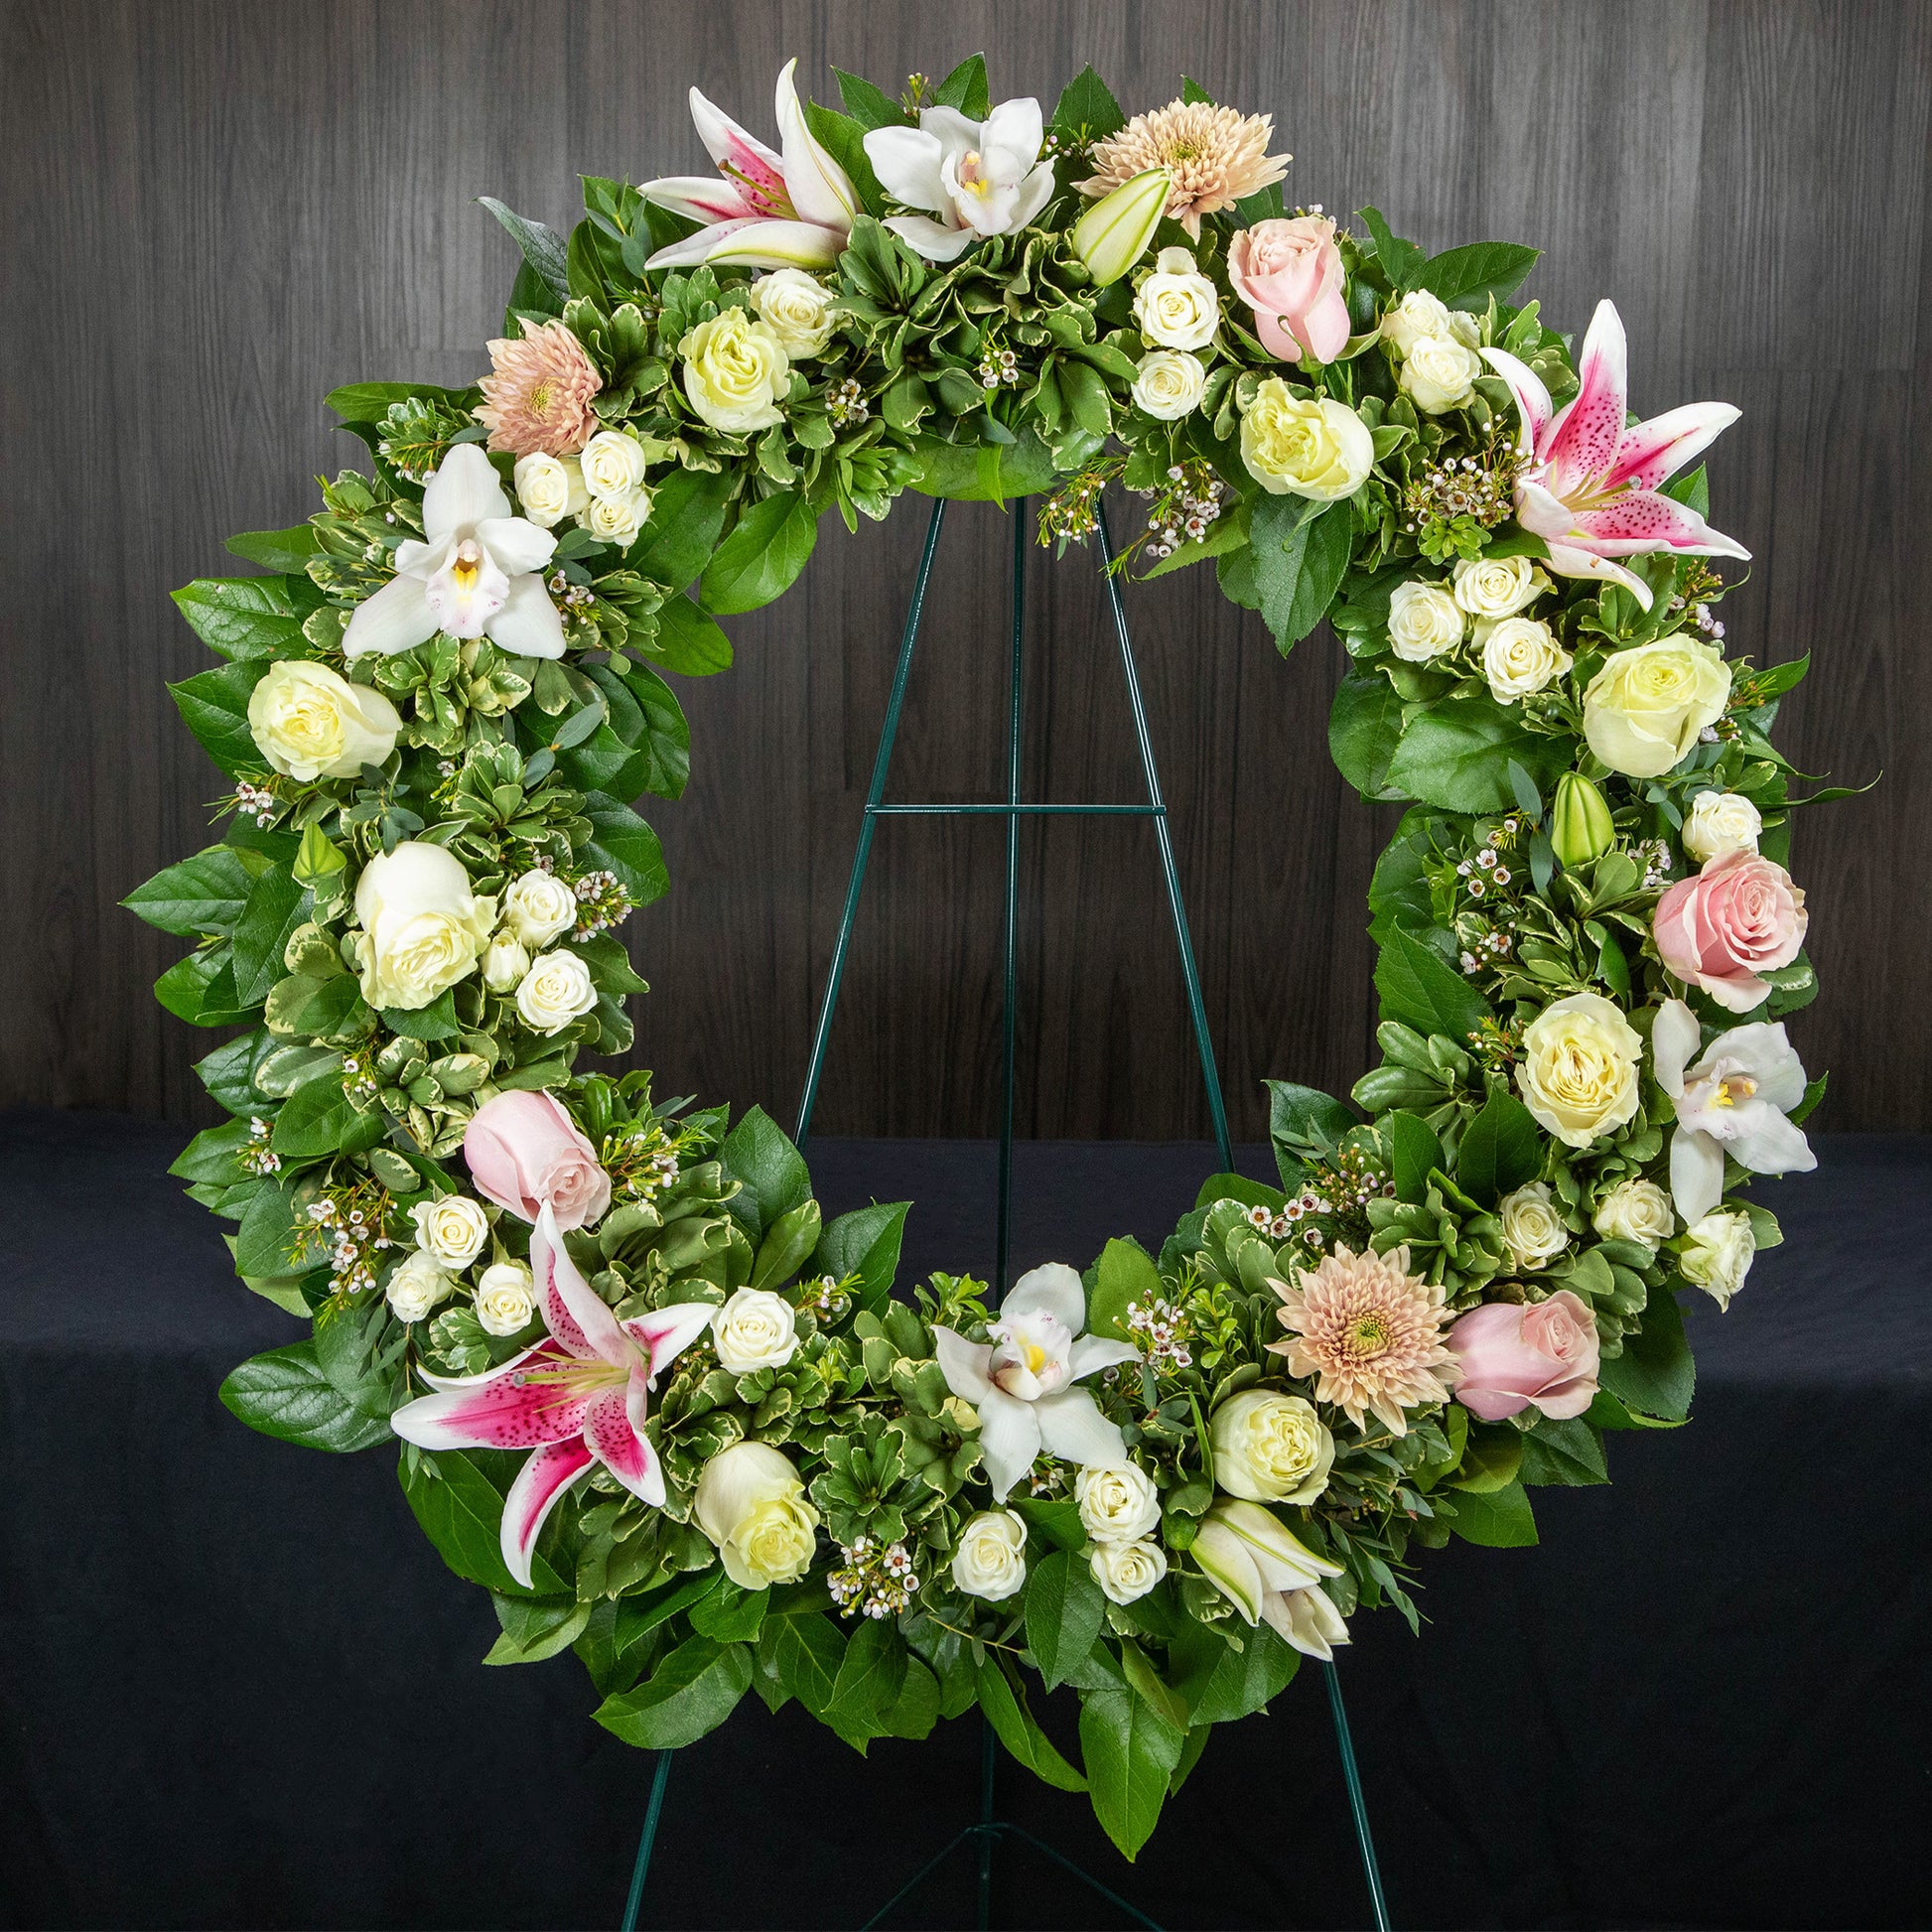 a 22 inch funeral wreath with mostly white flowers and pops of soft pink and peach